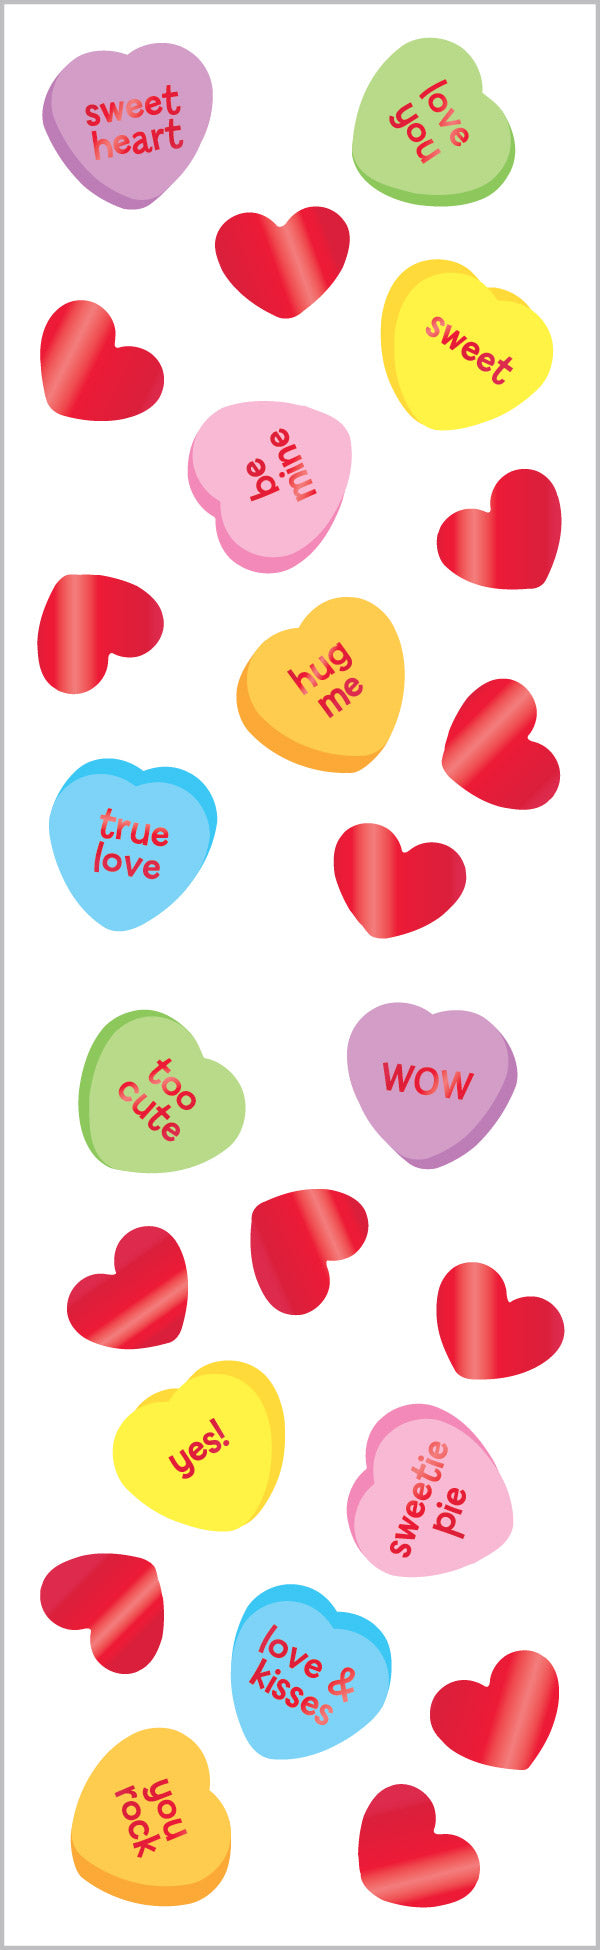 Candy Hearts, Reflections Stickers - Mrs. Grossman's